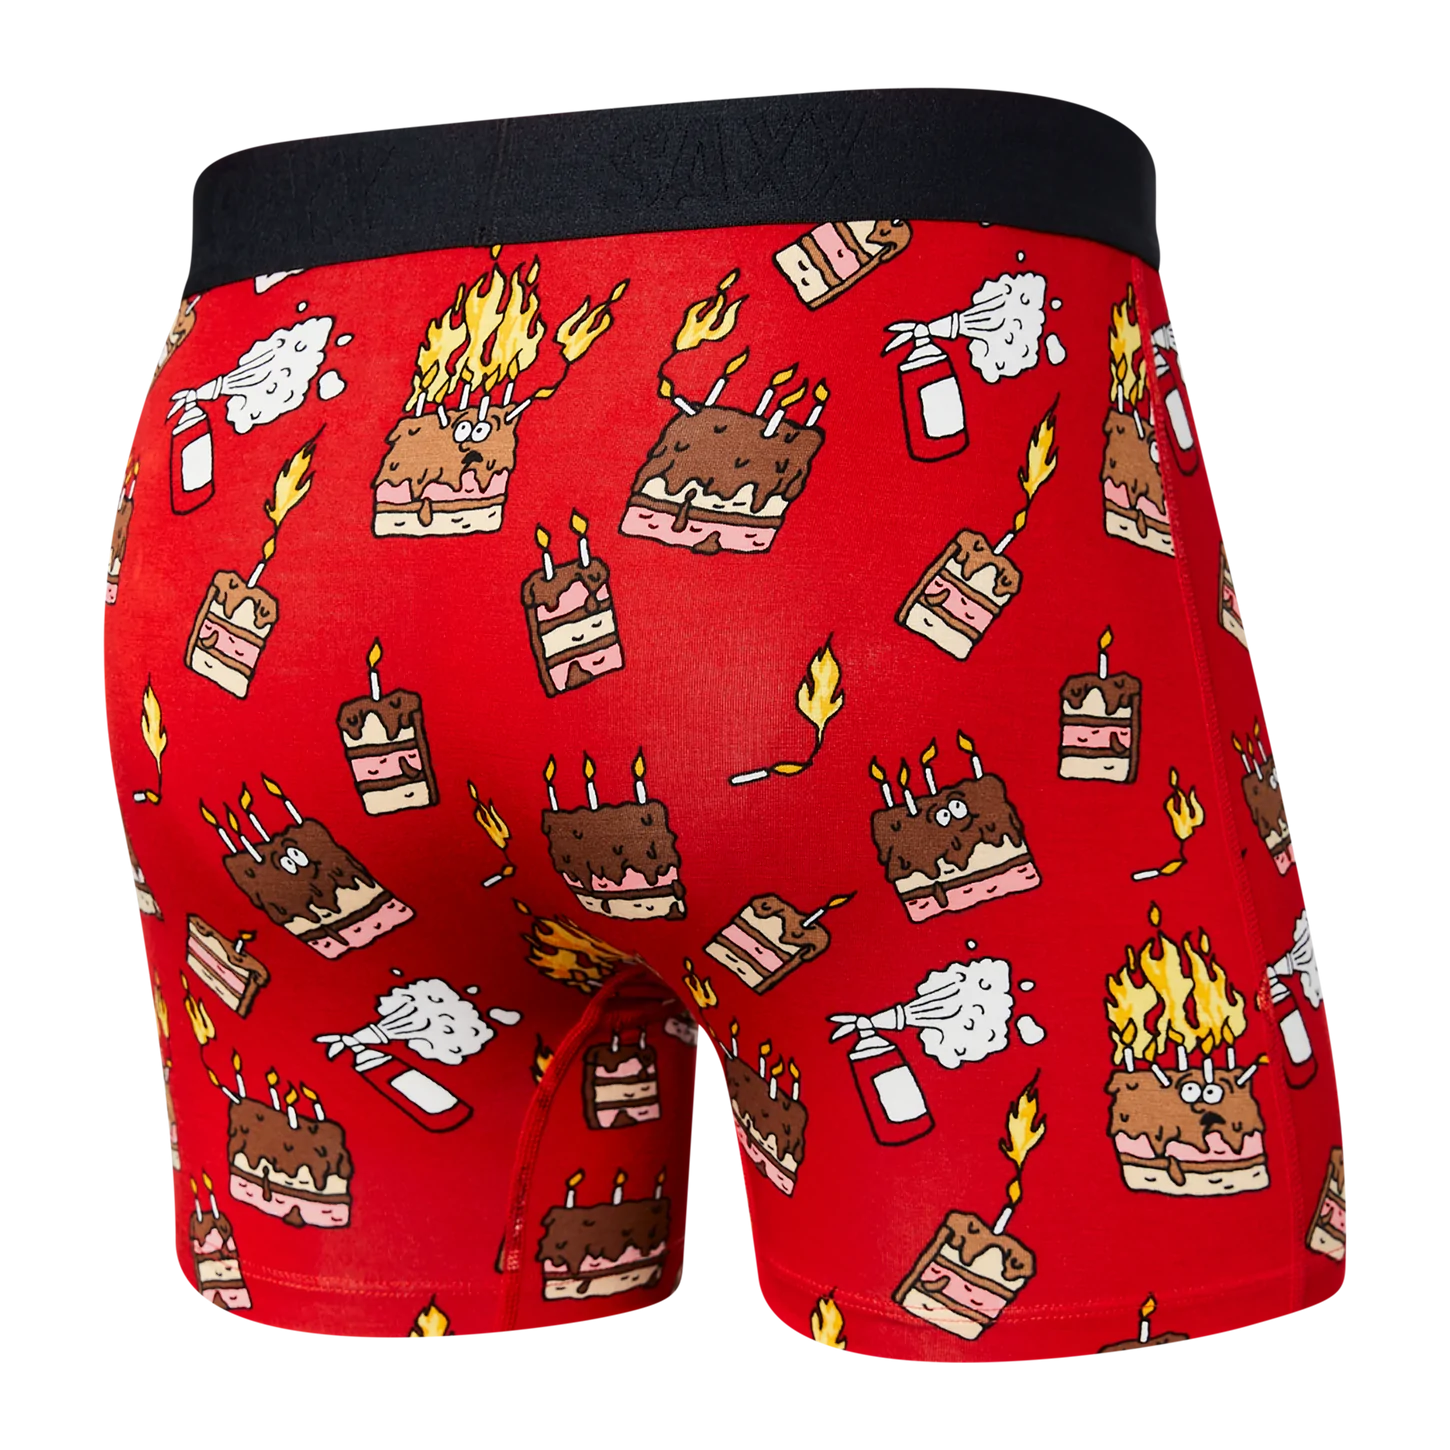 Saxx Vibe Boxer Brief - Fired Up Red